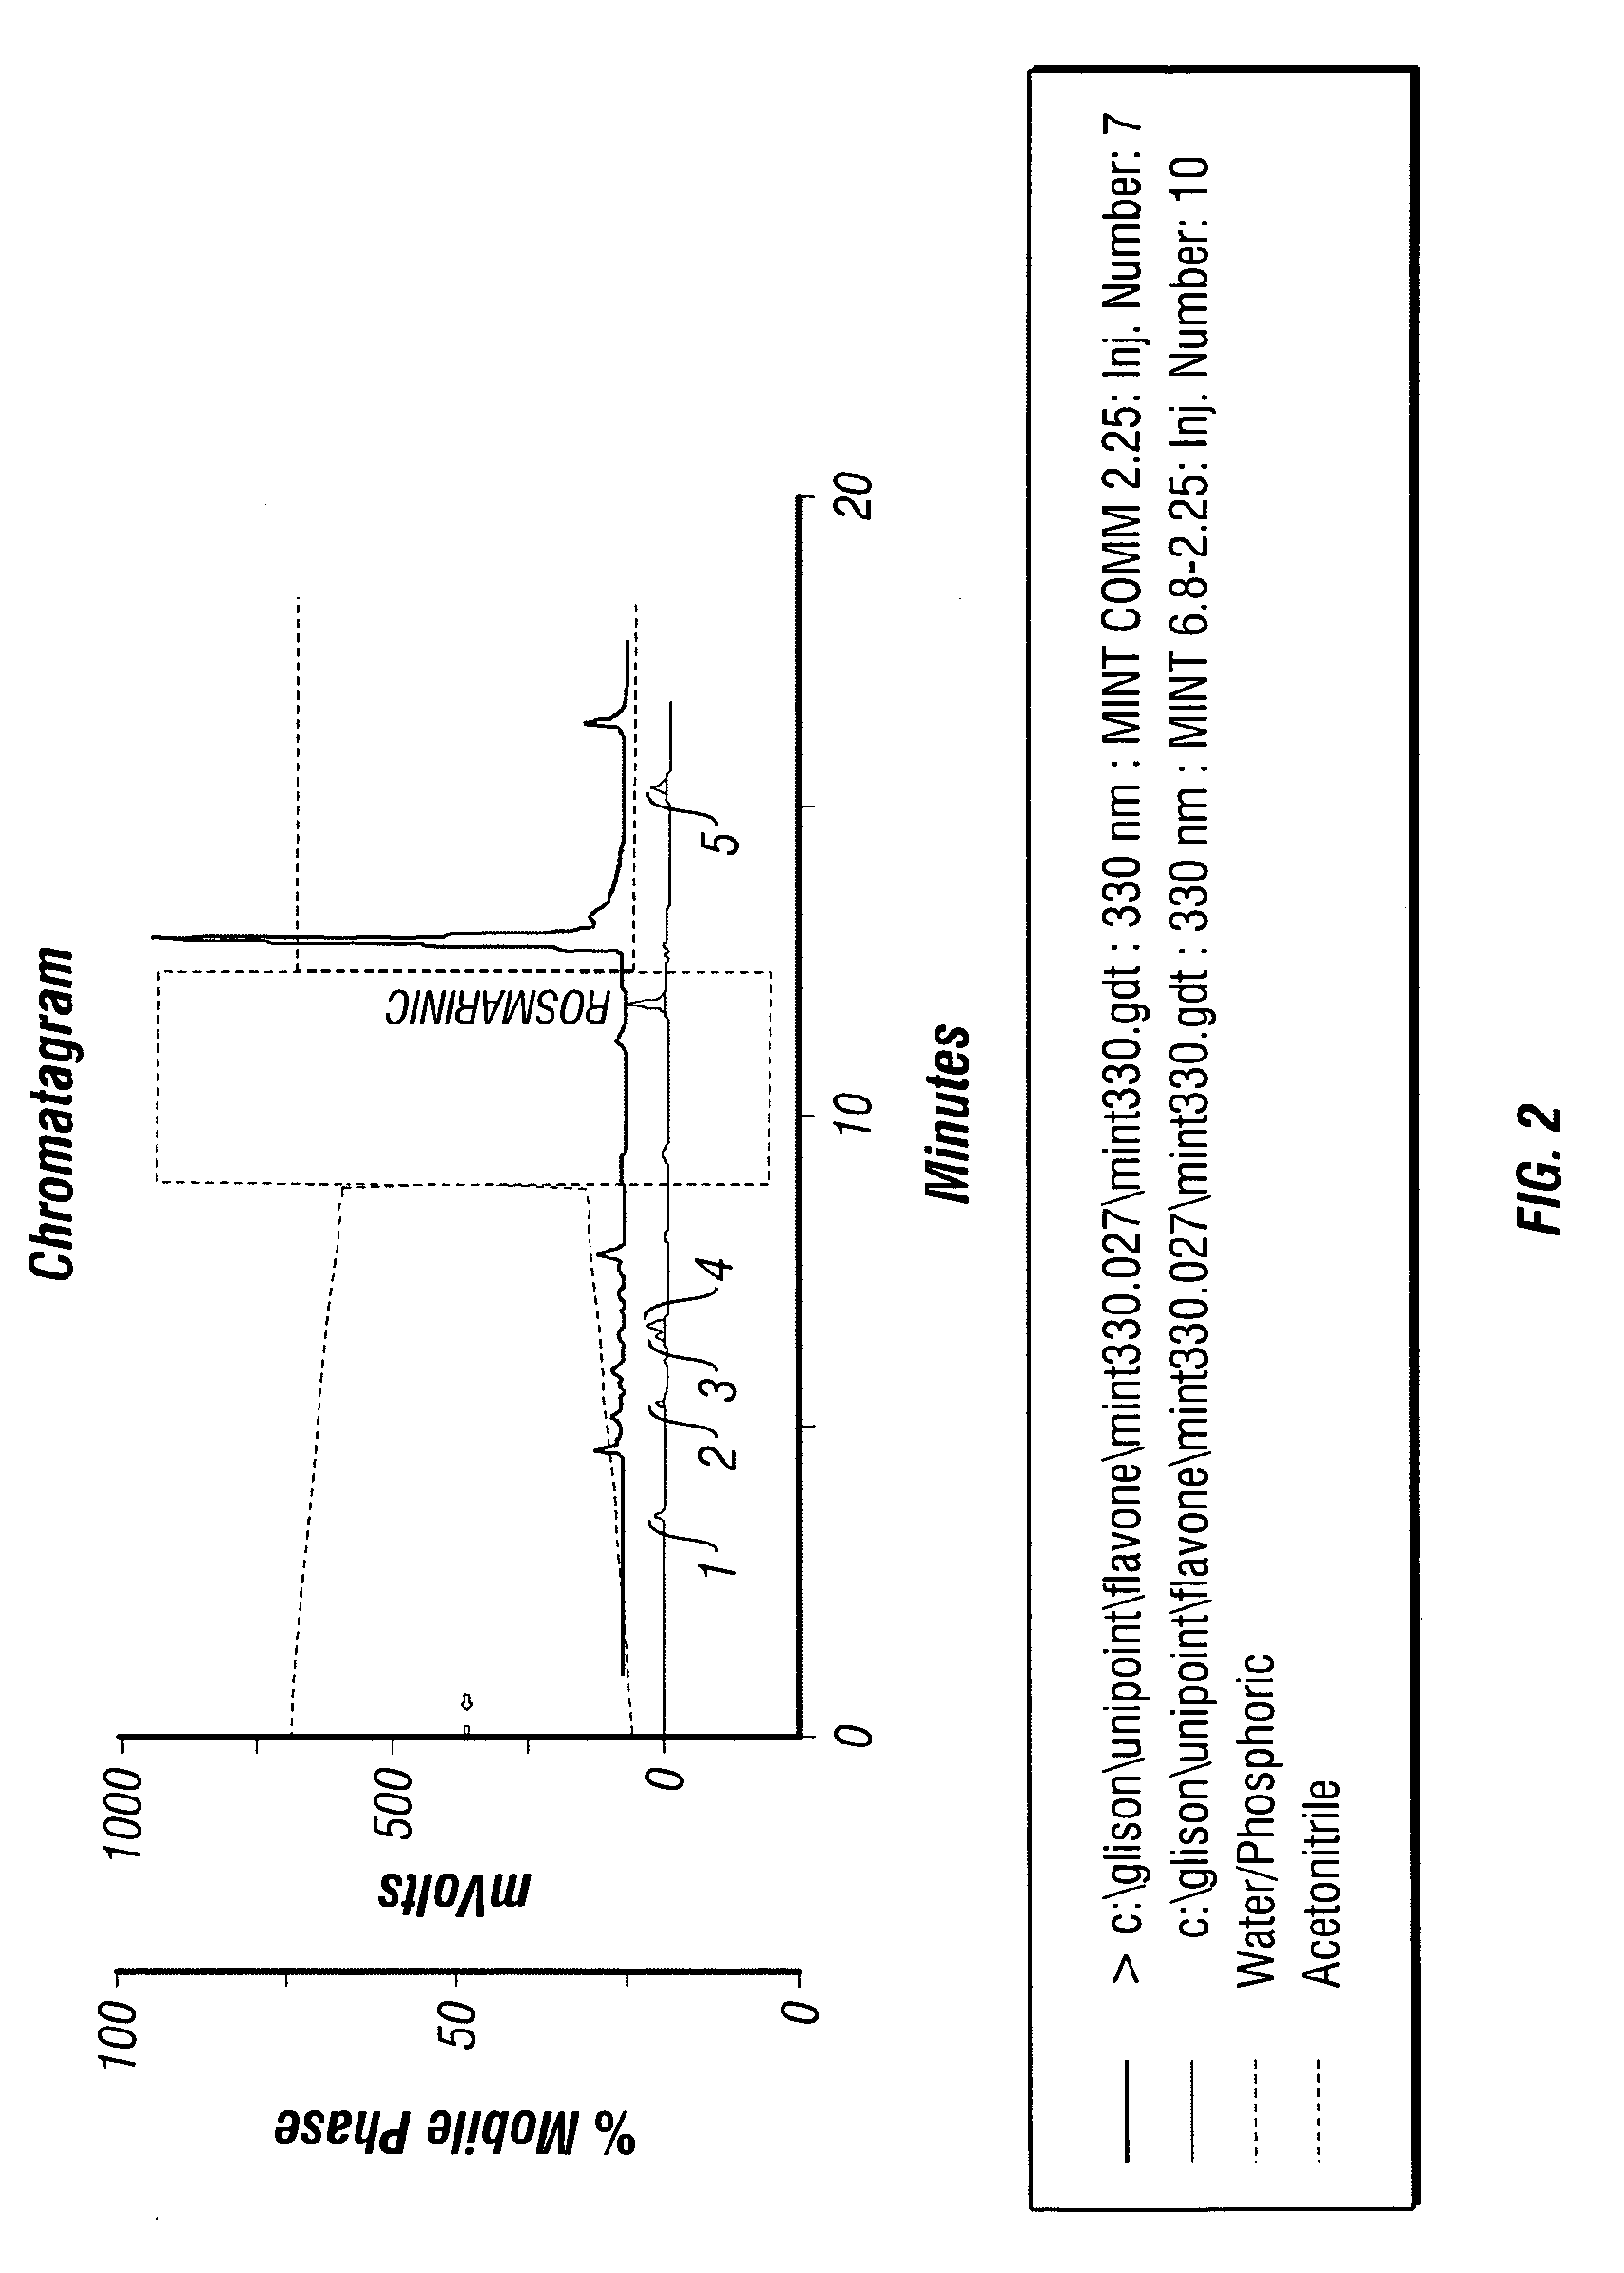 Production of Rosmarinic Acid from Spearmint and uses Thereof